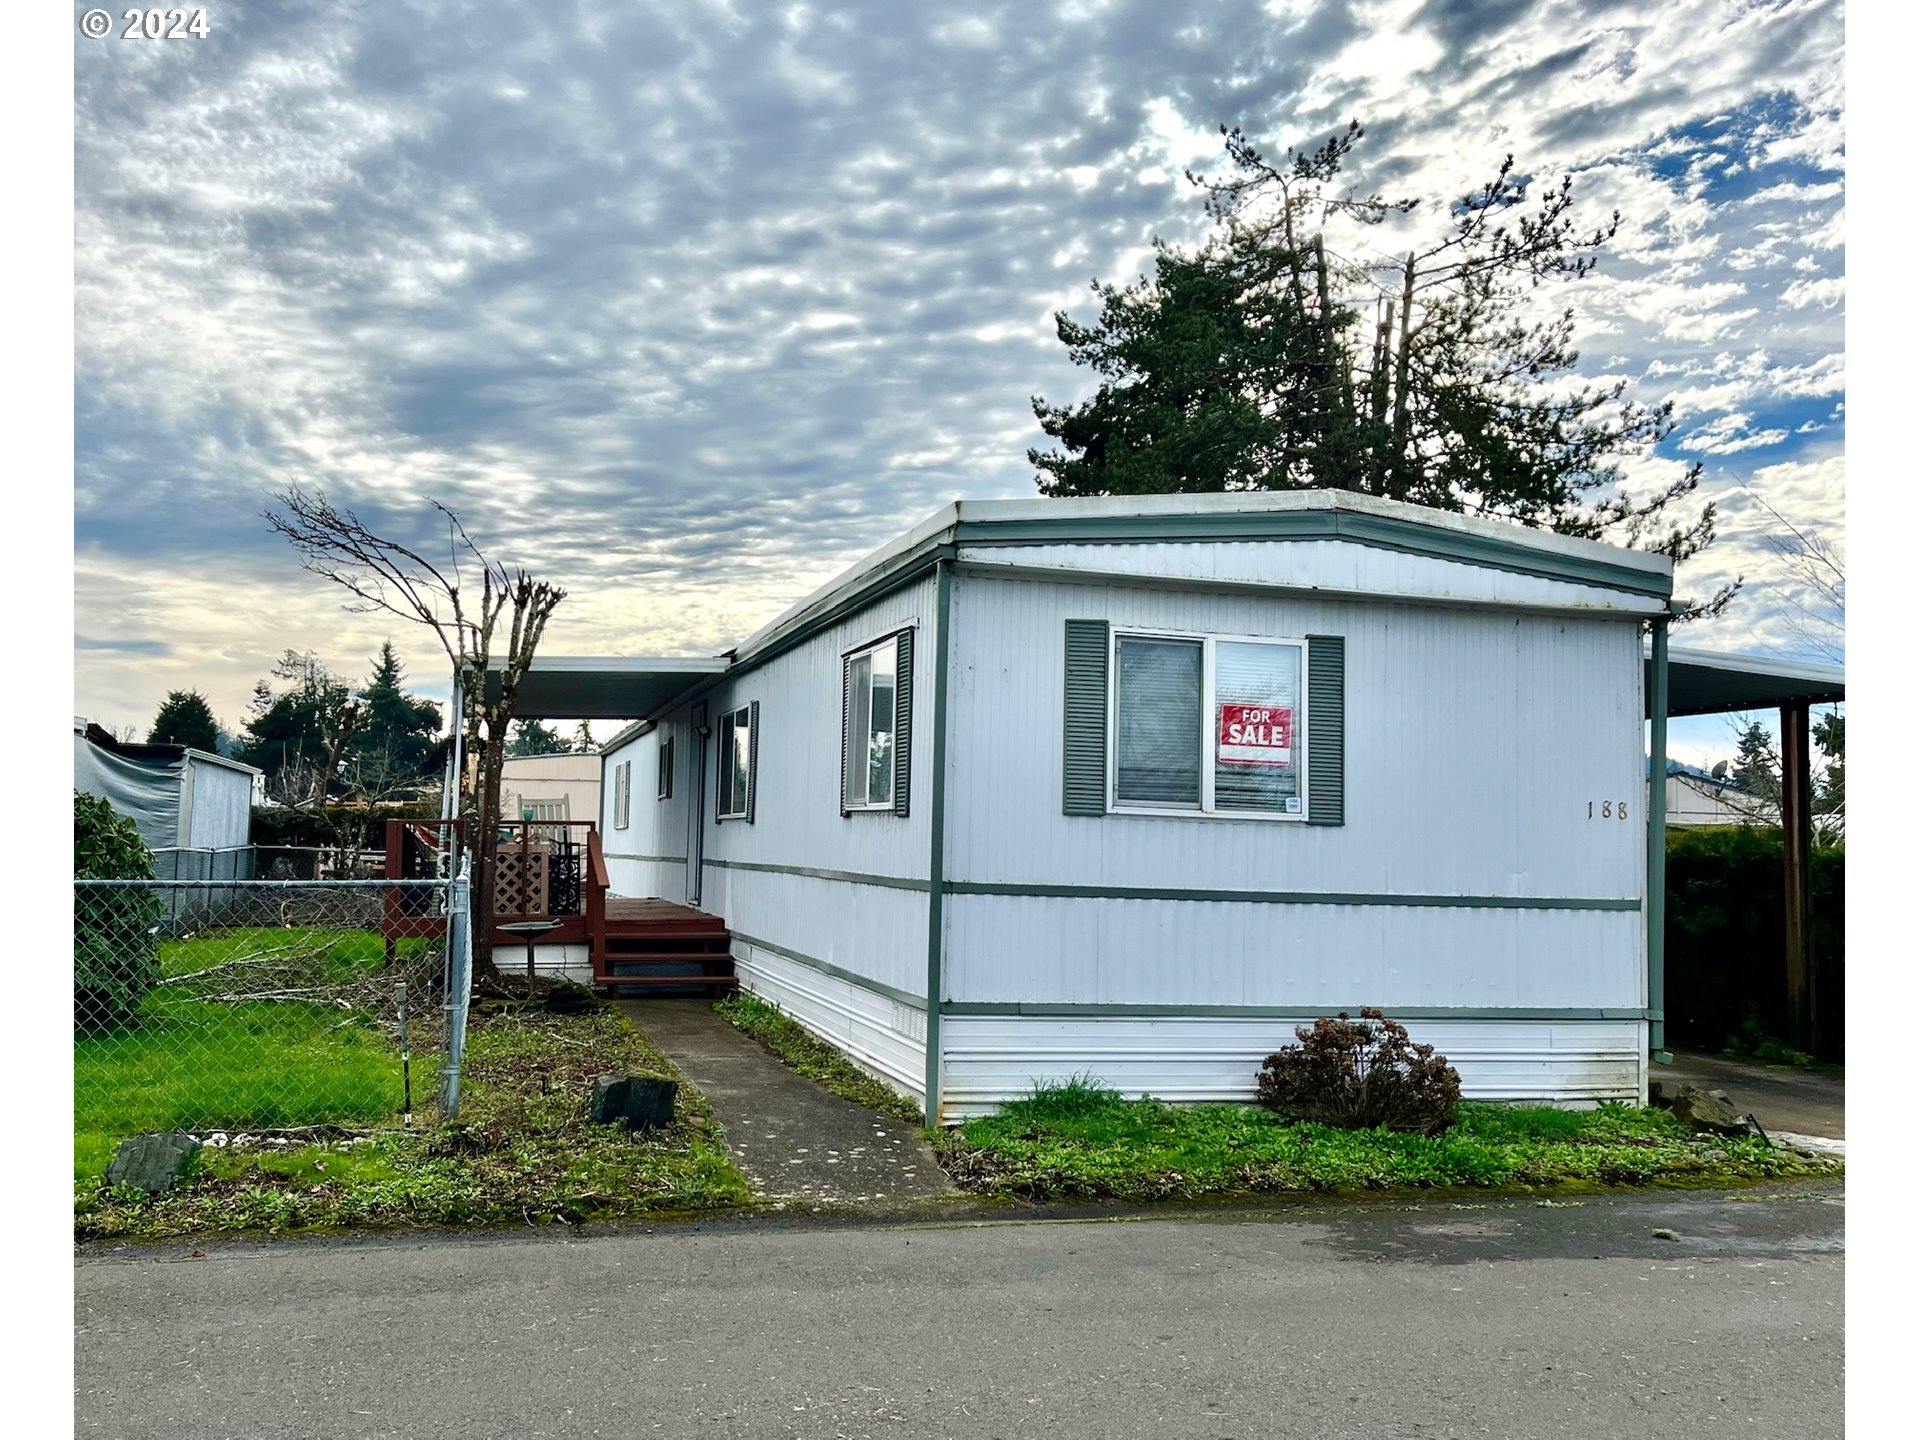 5335 MAIN ST #188, Springfield, OR 